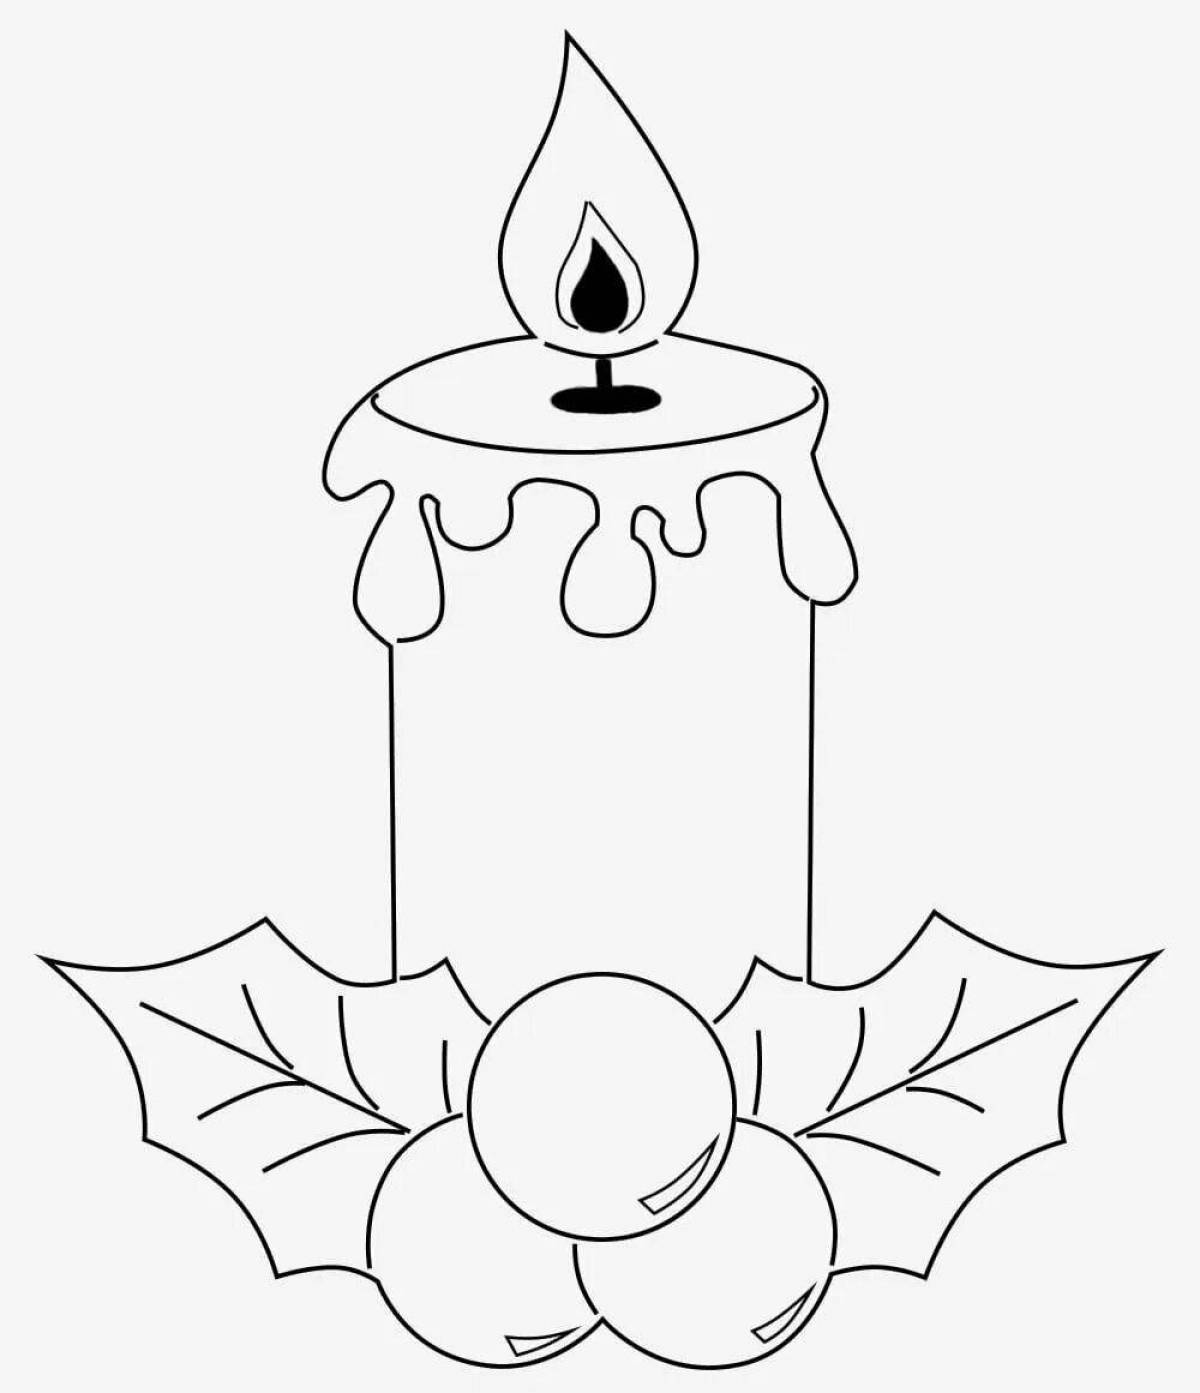 Exquisite christmas coloring book with candles for kids